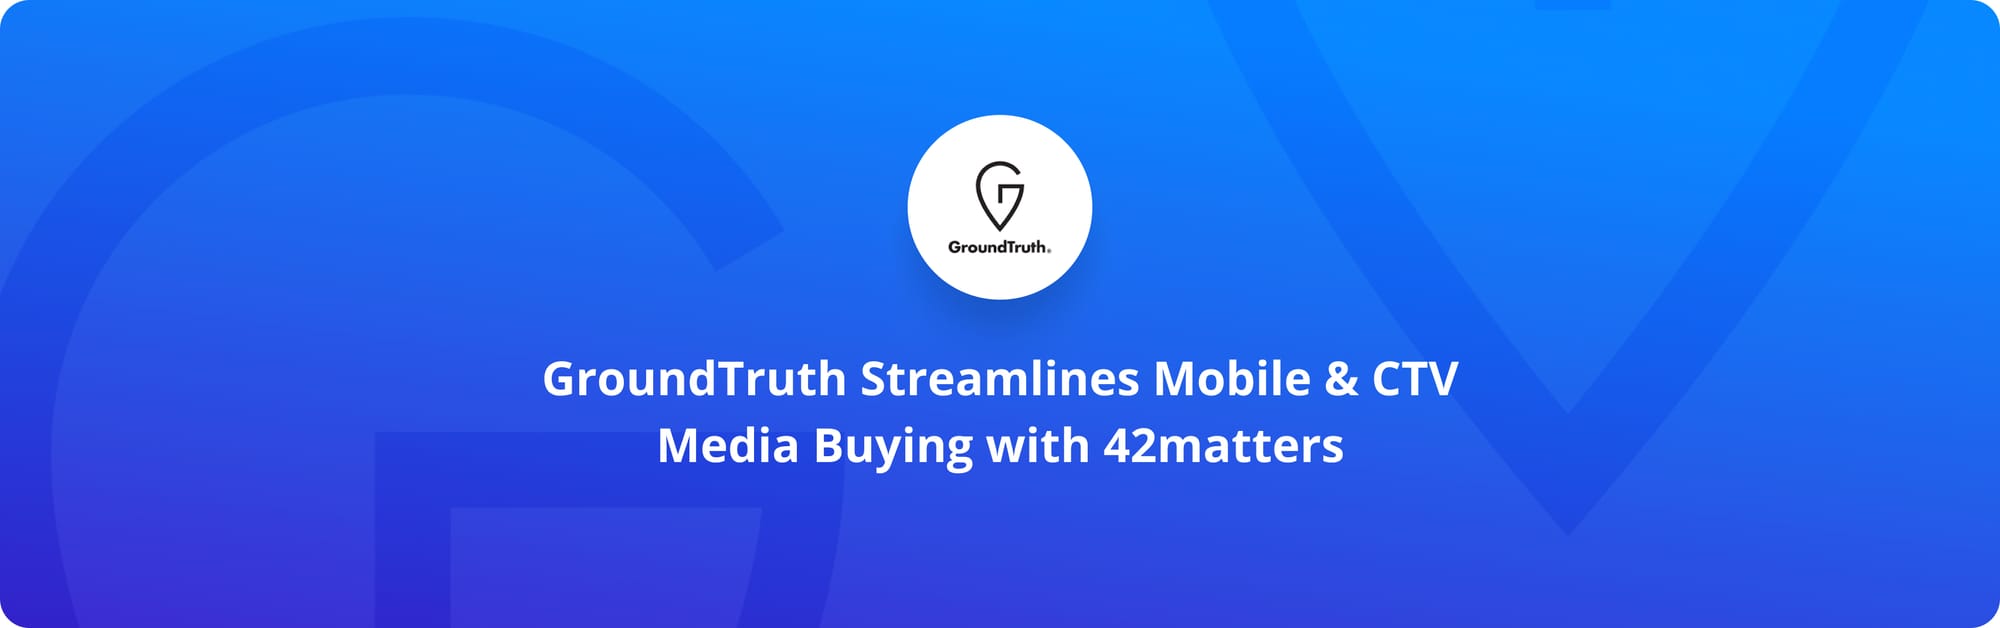 GroundTruth Streamlines Mobile & CTV Media Buying with 42matters